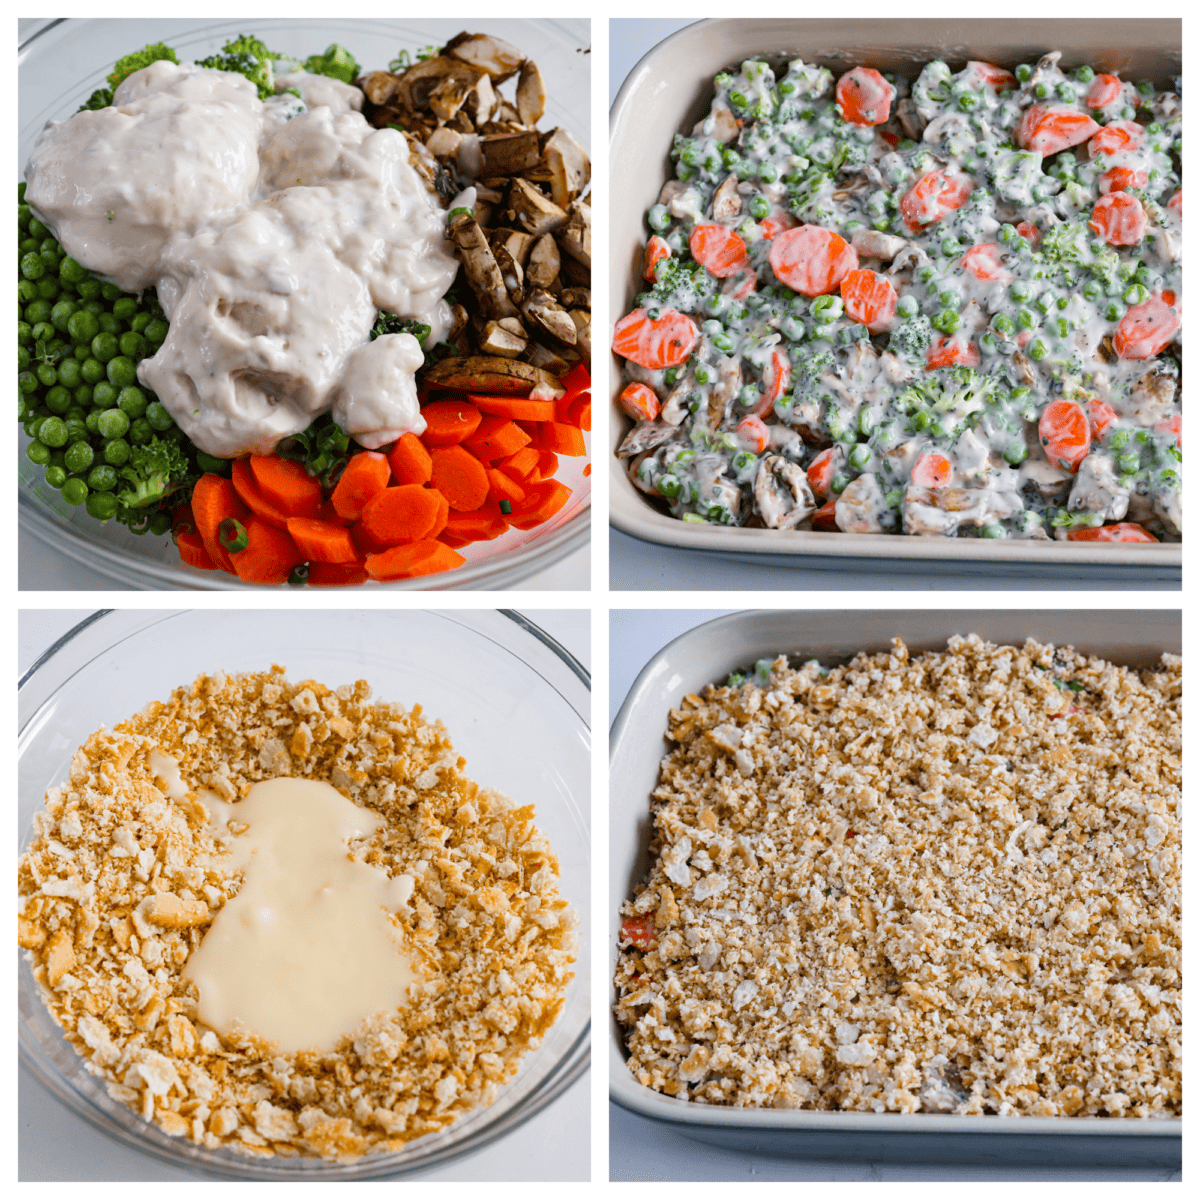 4-photo collage of the vegetables, creamy sauce, and crunchy topping being layered.